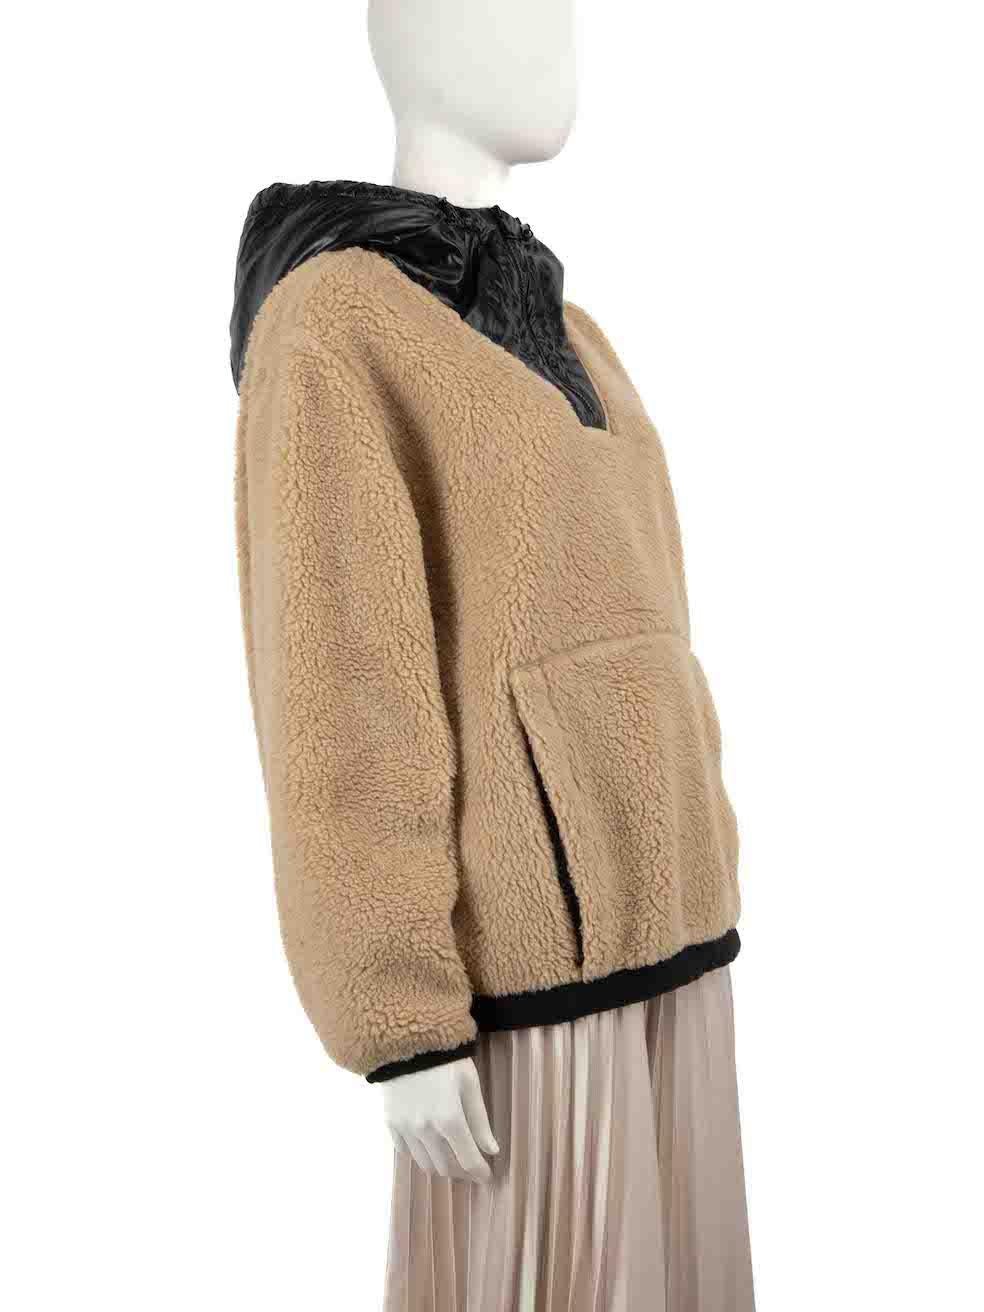 CONDITION is Very good. Minimal wear to jumper is evident. Minimal wear to the lining with light pilling to the texture on this used Moncler designer resale item.
 
 
 
 Details
 
 
 Camel
 
 Faux shearling
 
 Sweatshirt
 
 Hooded
 
 Front zip